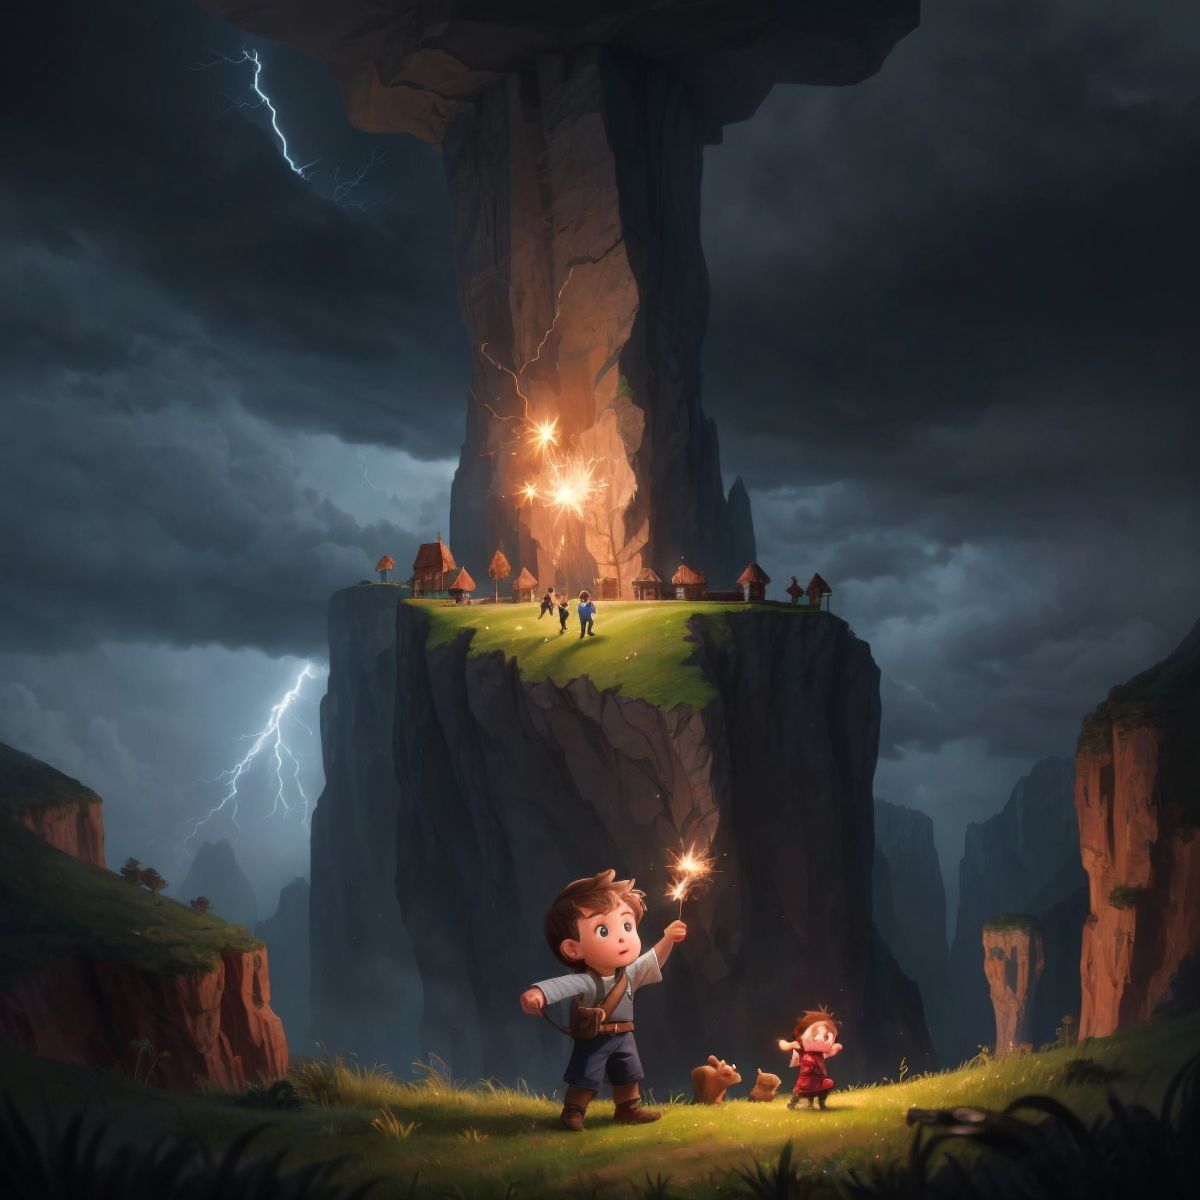 Alex and Spark helping creatures in distress during a stormy night near a towering cliff.